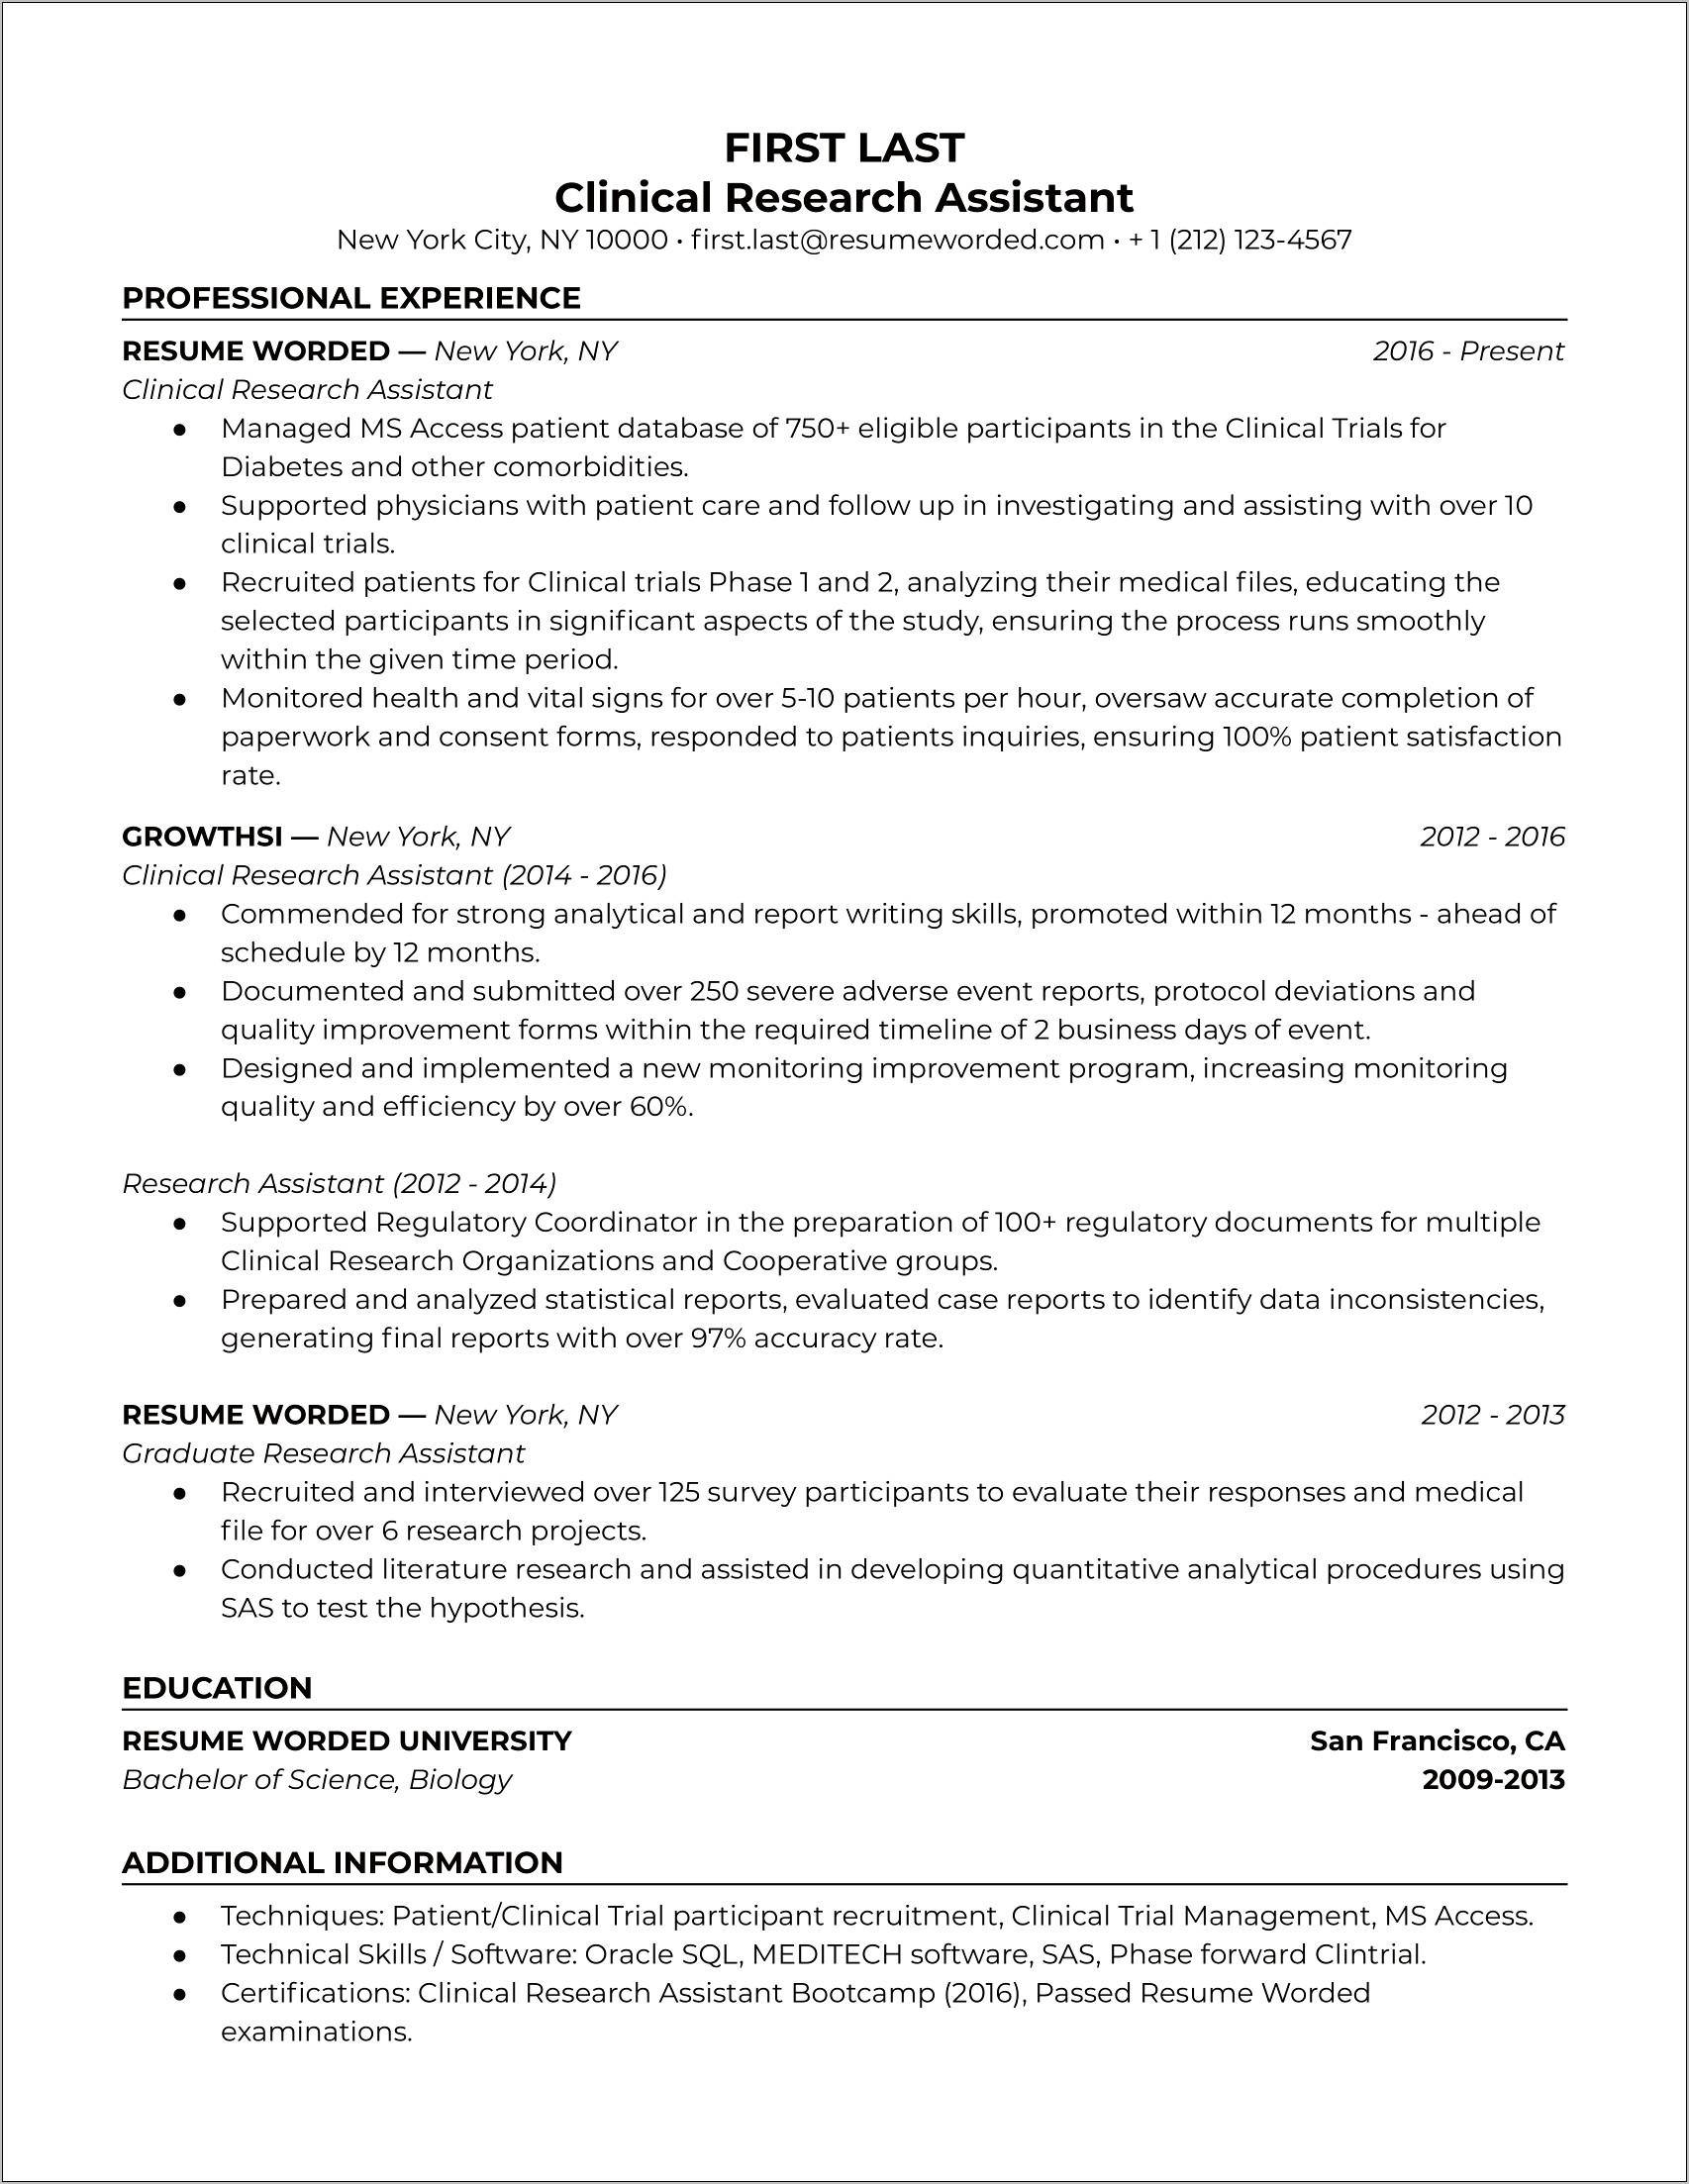 Sample Resume For Reserach Assiitant